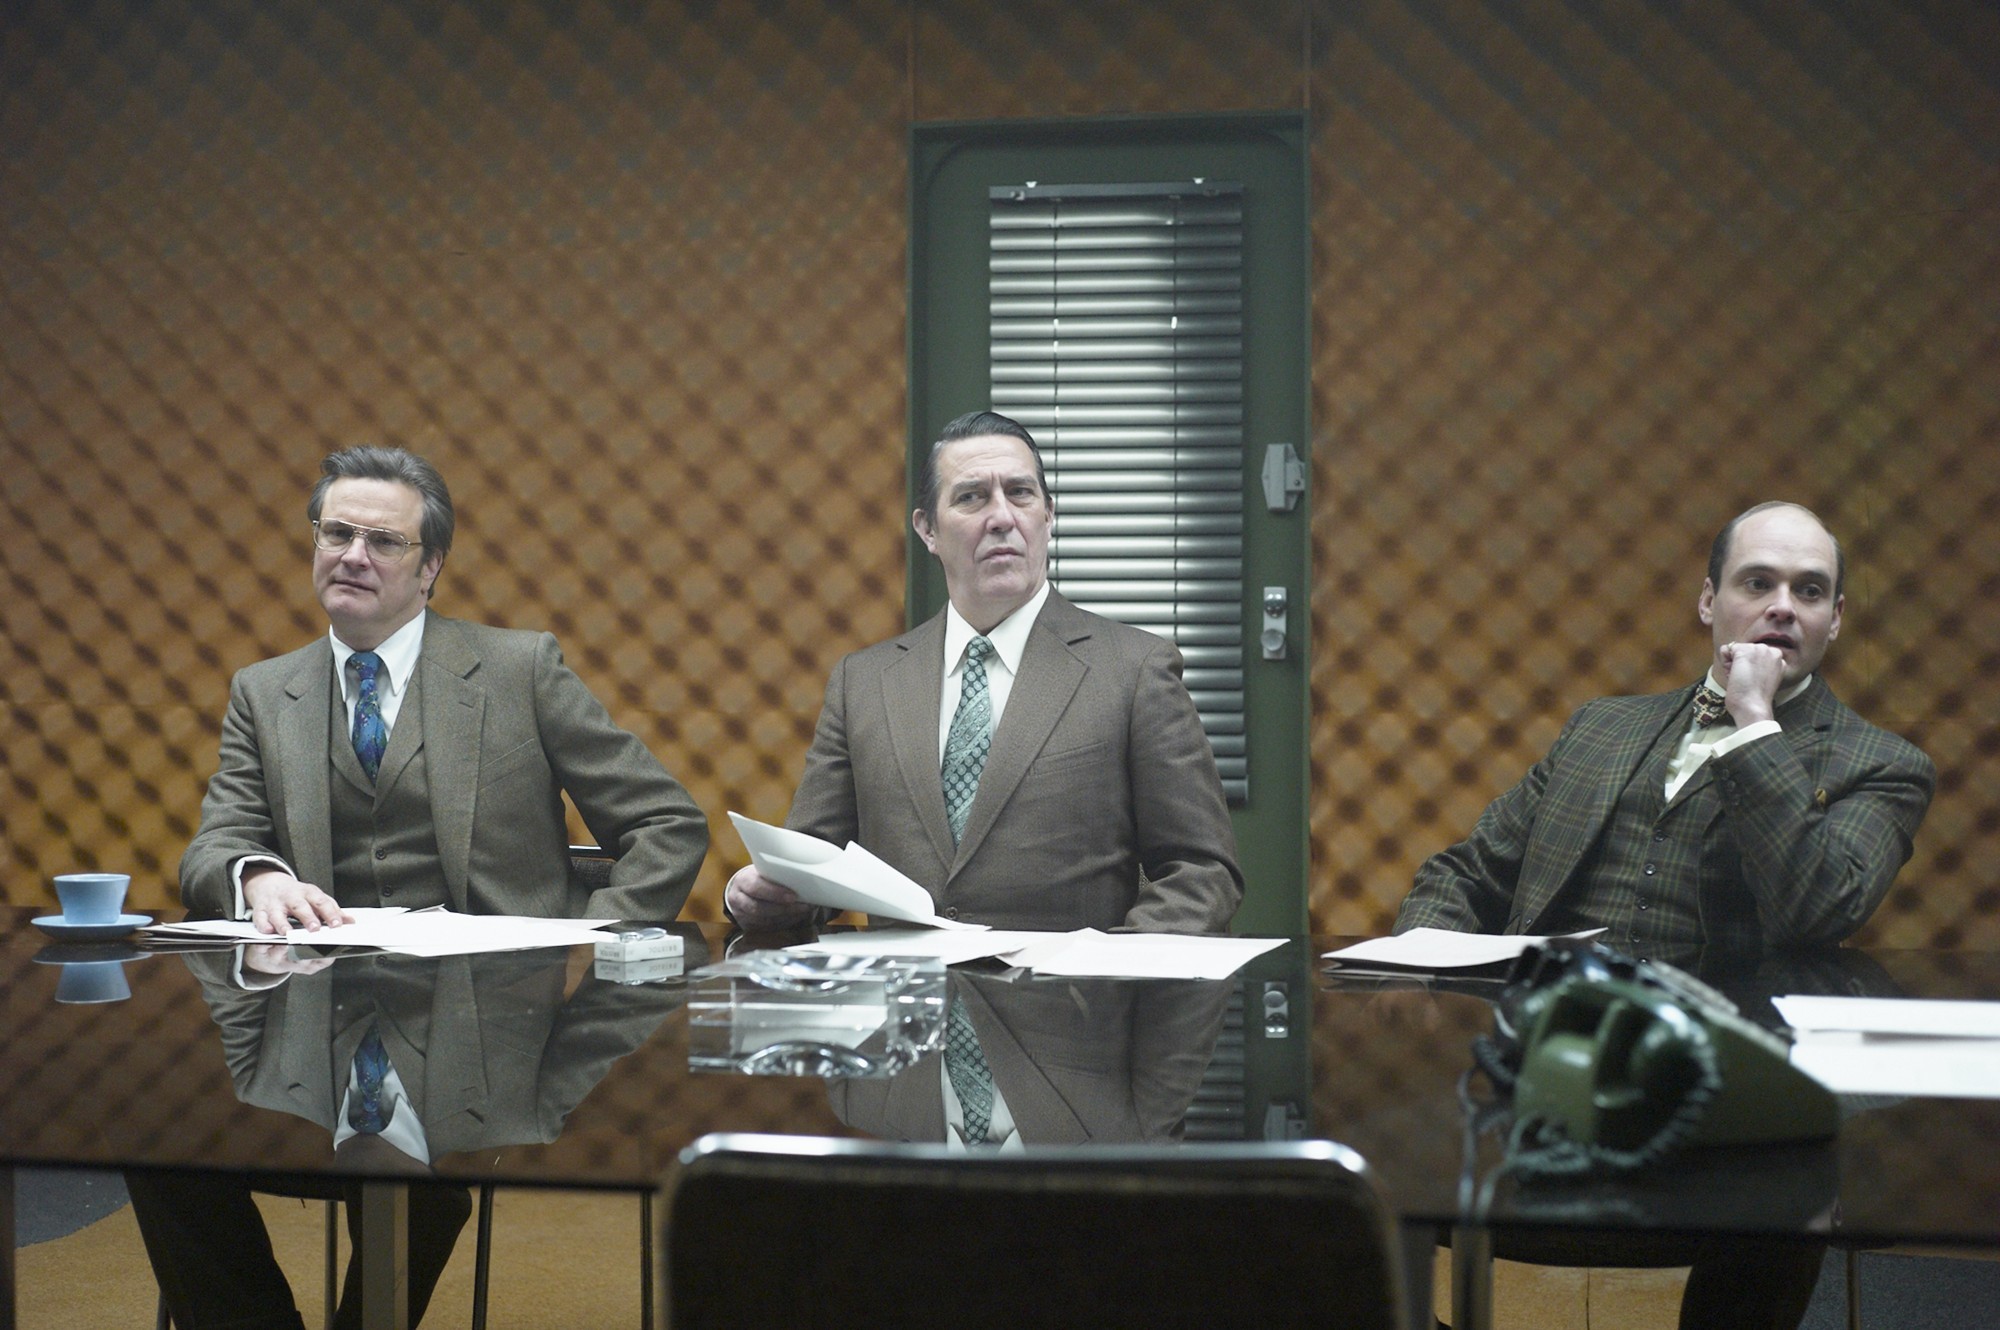 Colin Firth, Ciaran Hinds and Toby Jones in Focus Features' Tinker, Tailor, Soldier, Spy (2011)